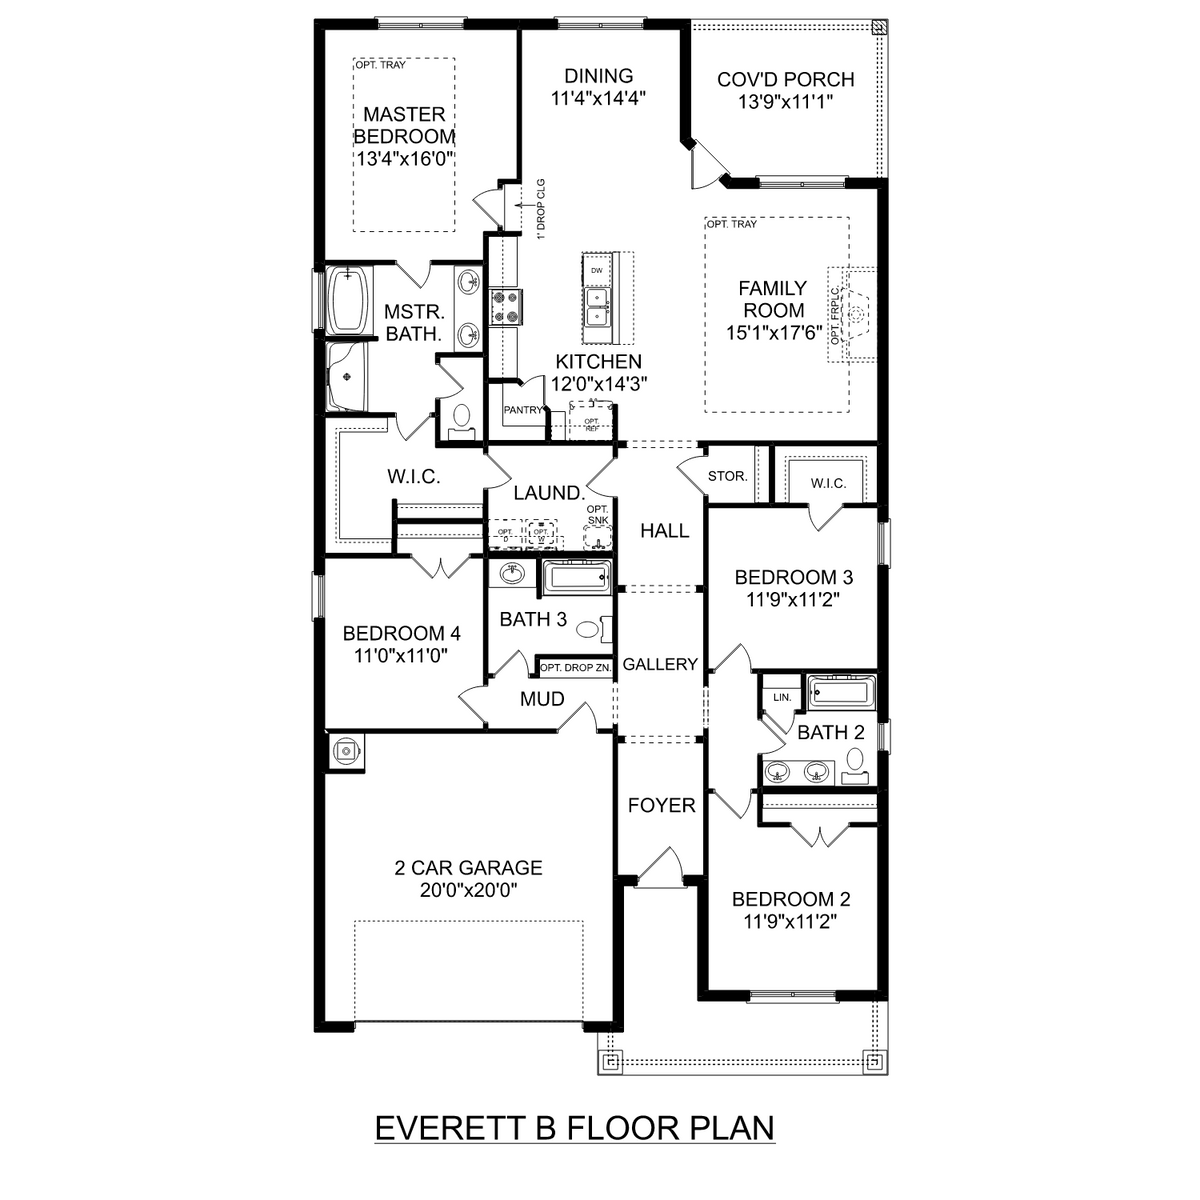 1 - The Everett B floor plan layout for 135 Ivy Vine Drive in Davidson Homes' Ivy Hills community.